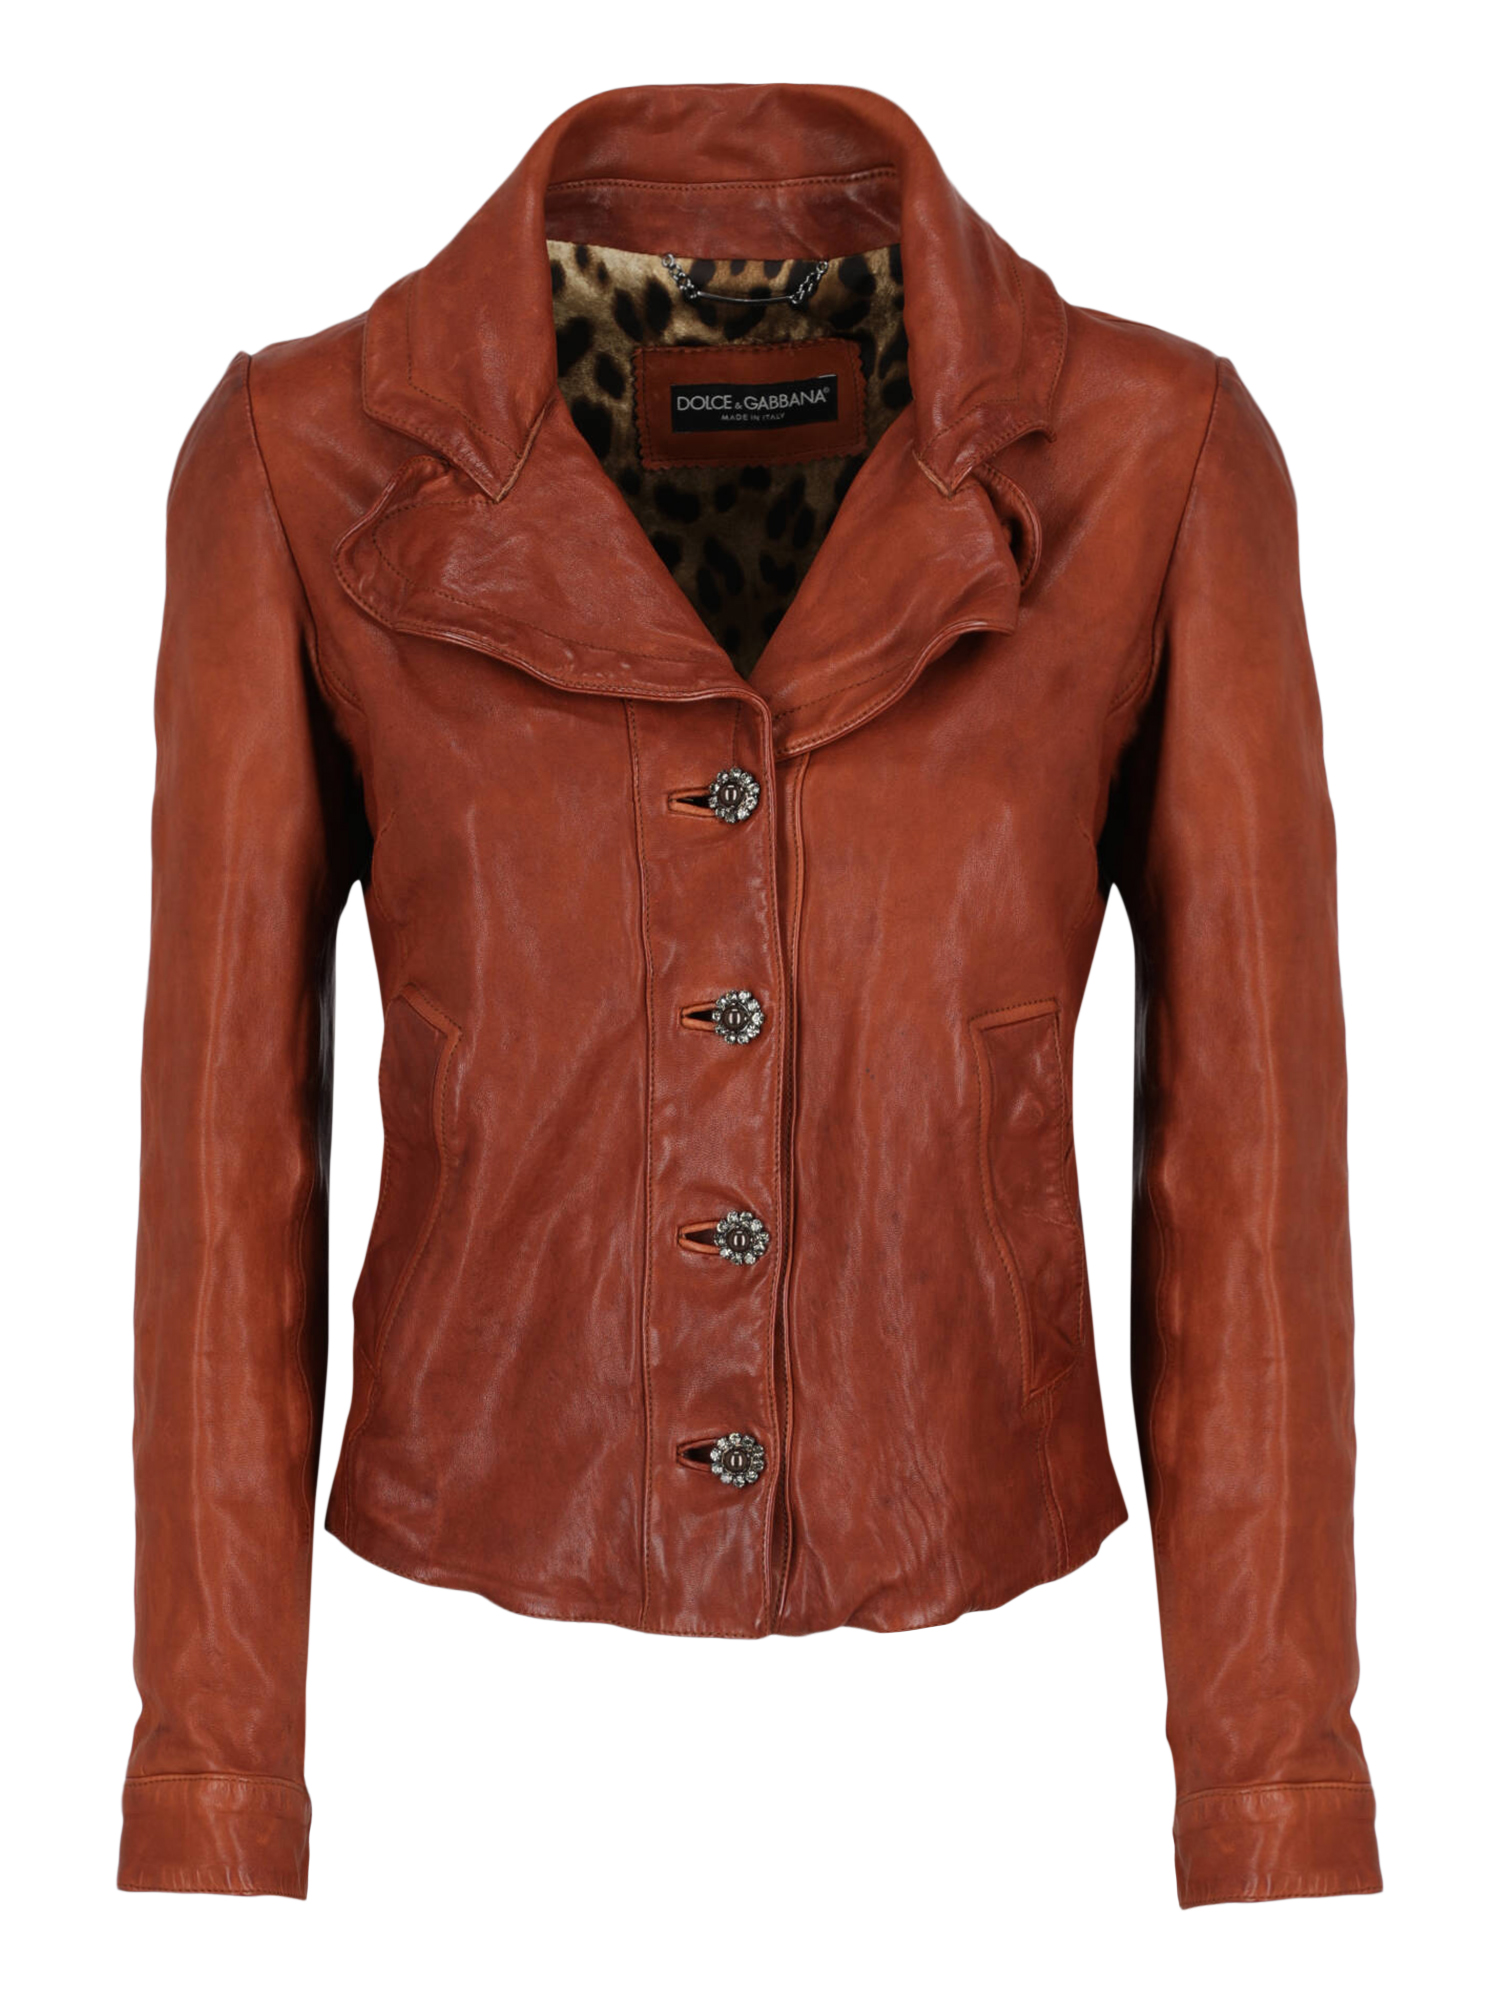 Pre-owned Dolce & Gabbana Women's Jackets -  - In Brown Leather